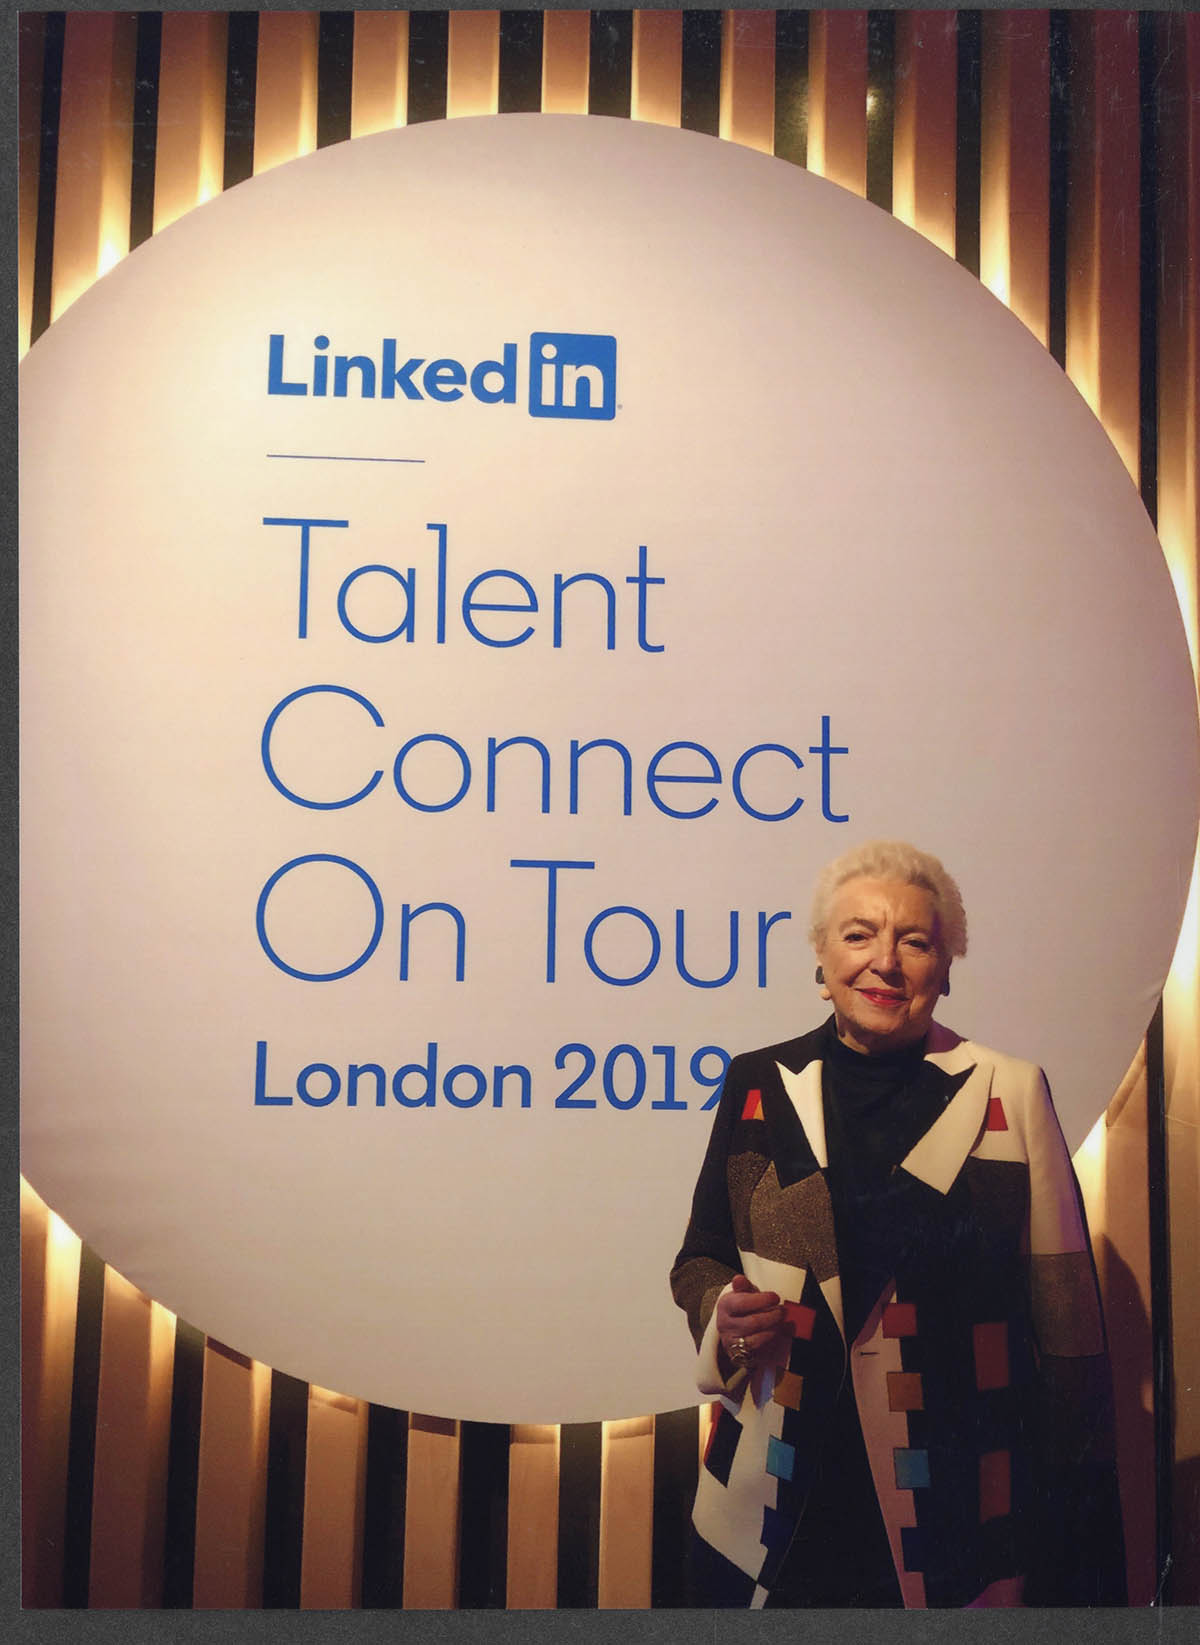 A photograph of Dame Stephanie Shirley standing in front of a large promotional sign at the 2019 Linkedin Summit, Talent Connect On Tour. 